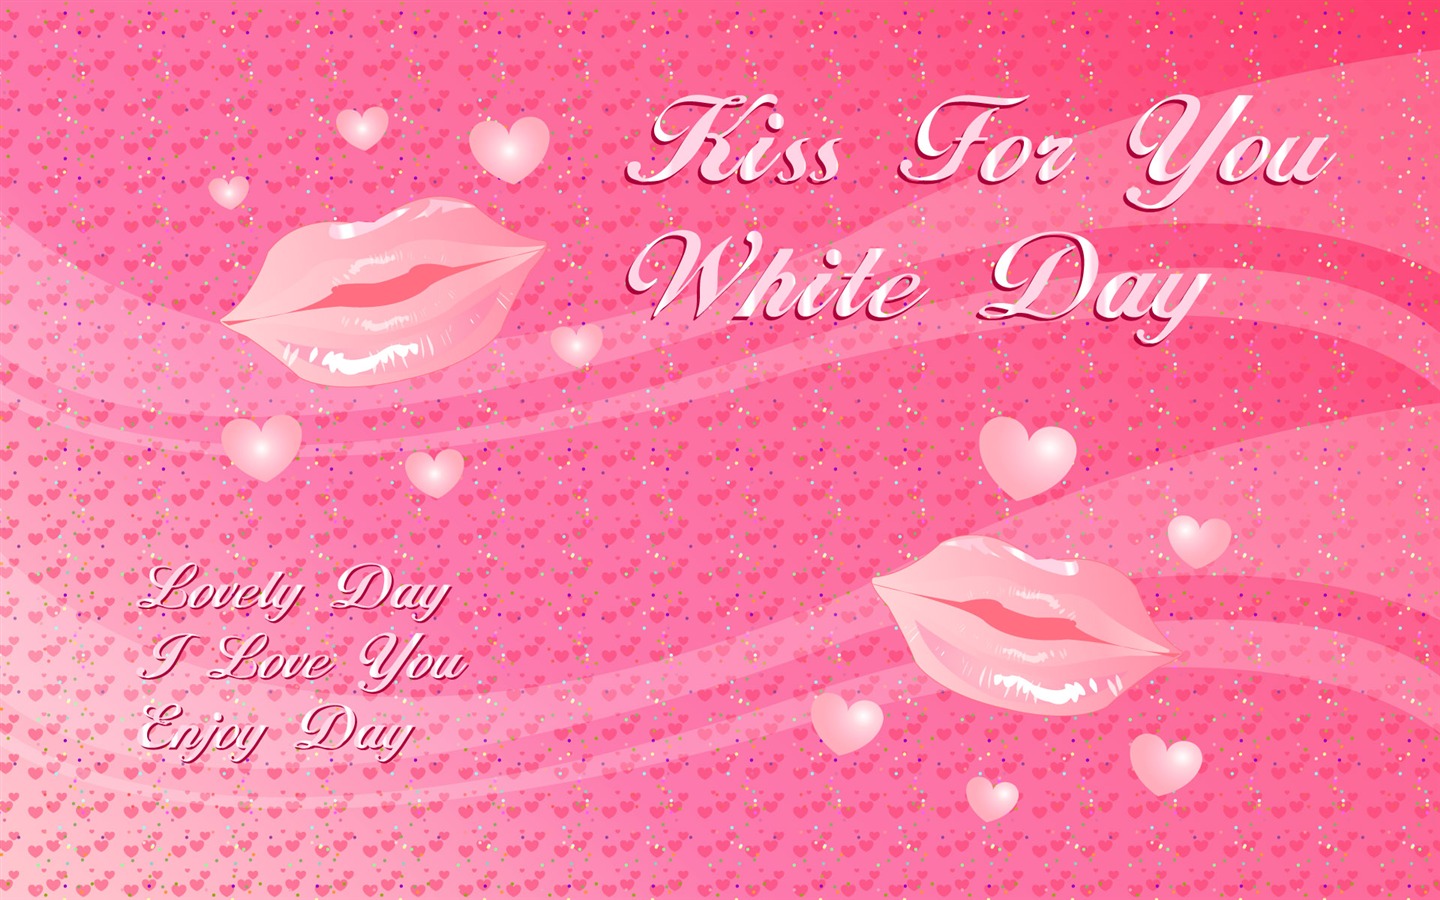 Valentine's Day Theme Wallpapers (1) #5 - 1440x900